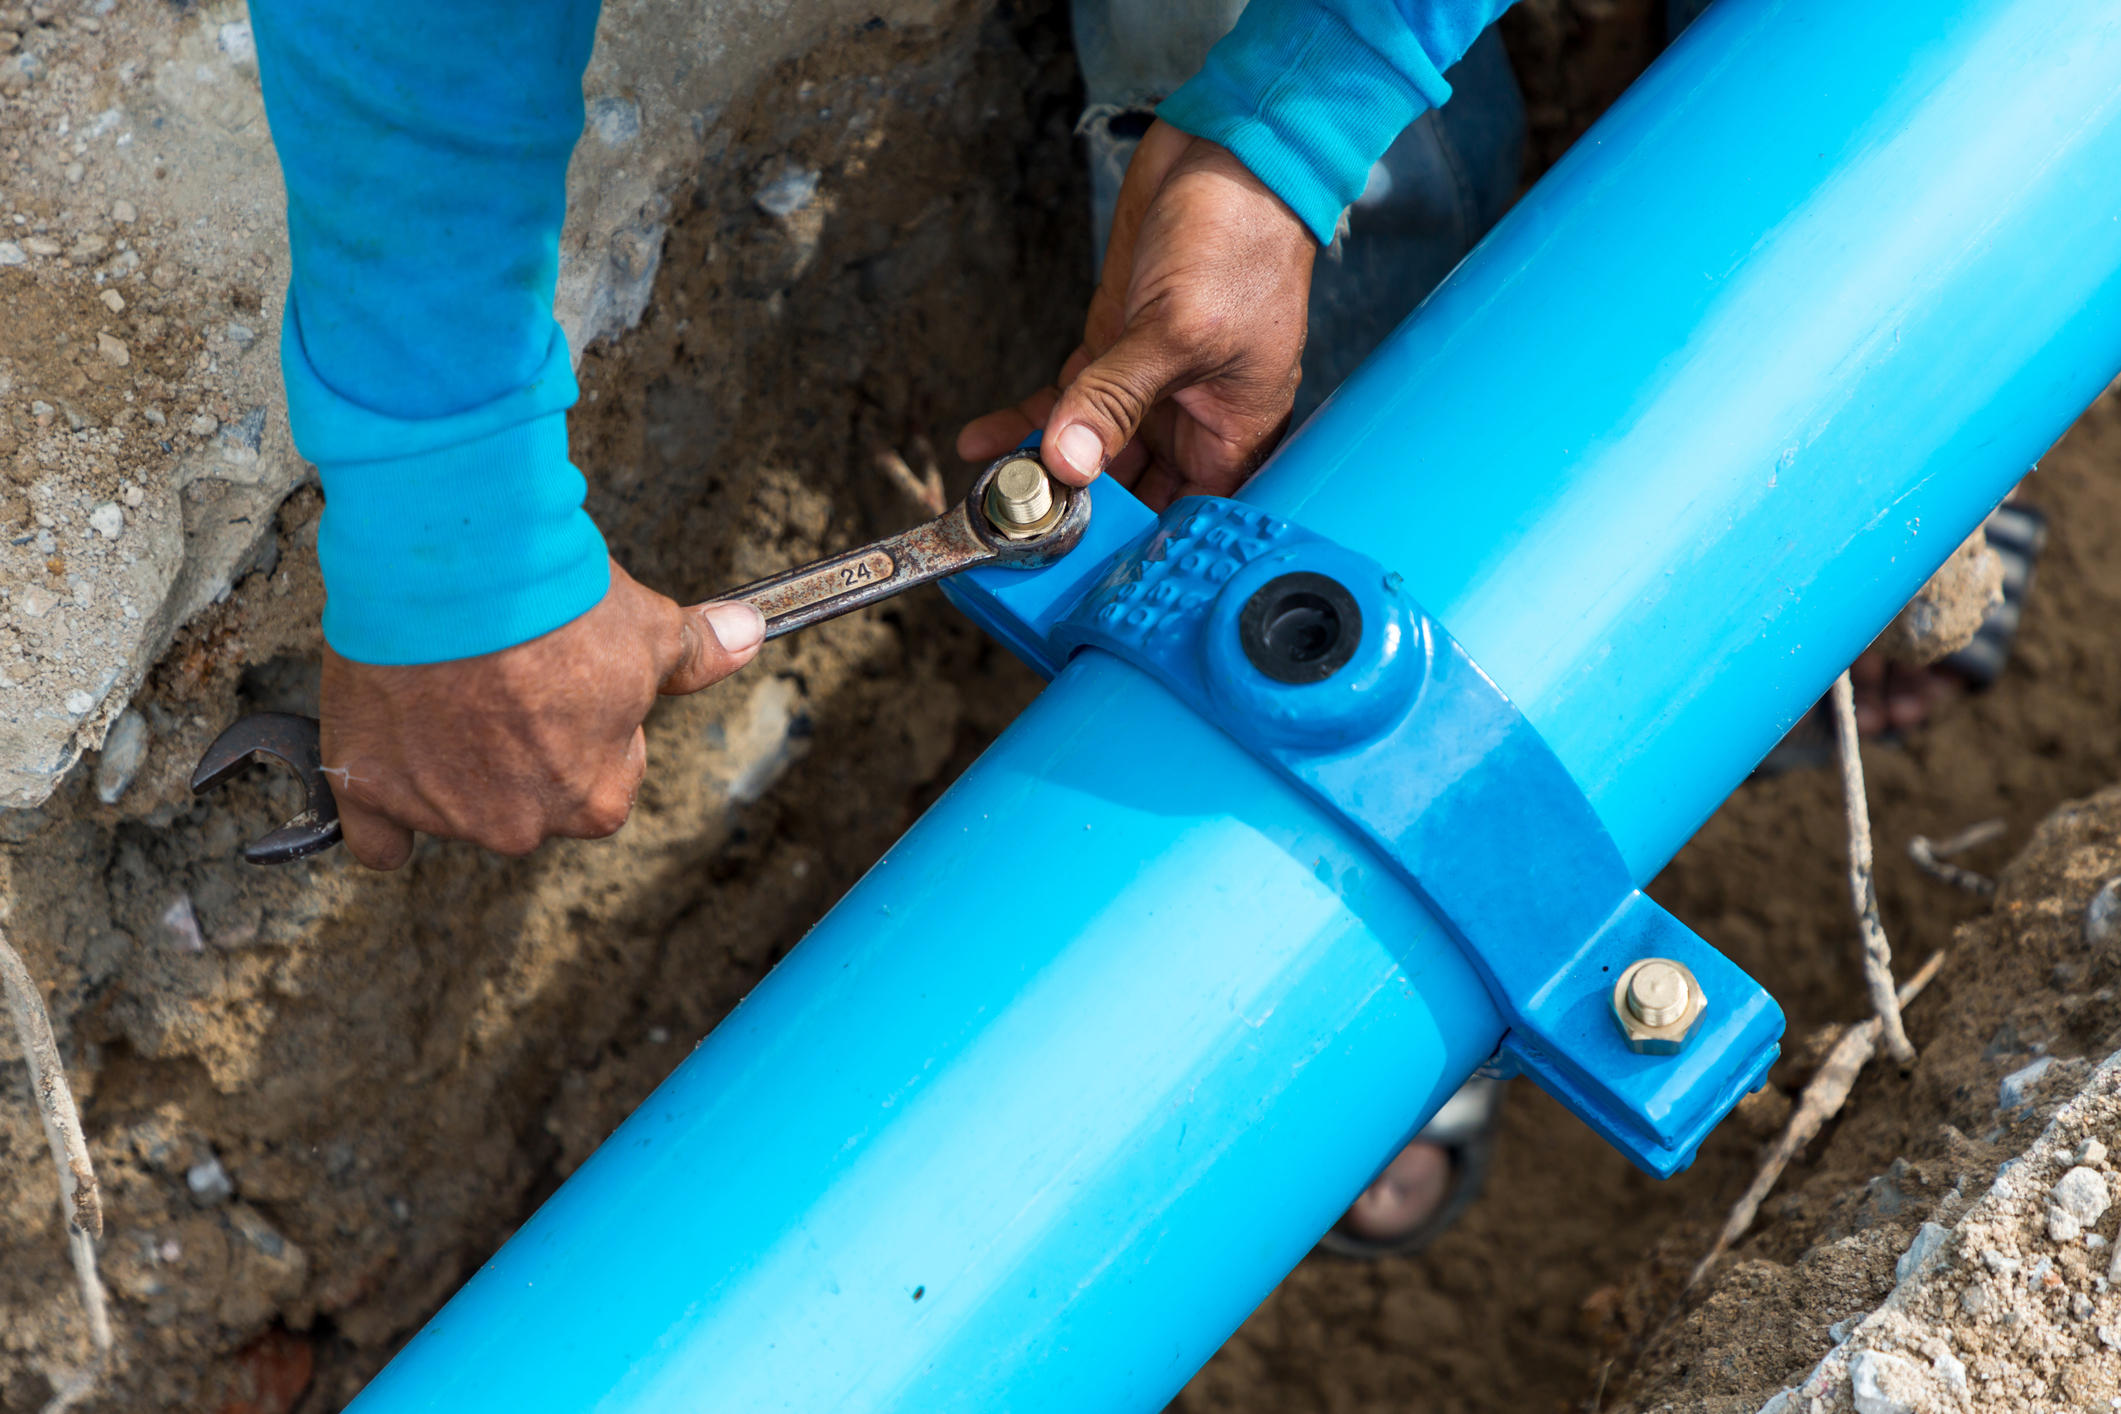 Our team is fully equipped to handle any sewer line repair including the water main line. If you need any repairs contact us now and we will get it done right away!